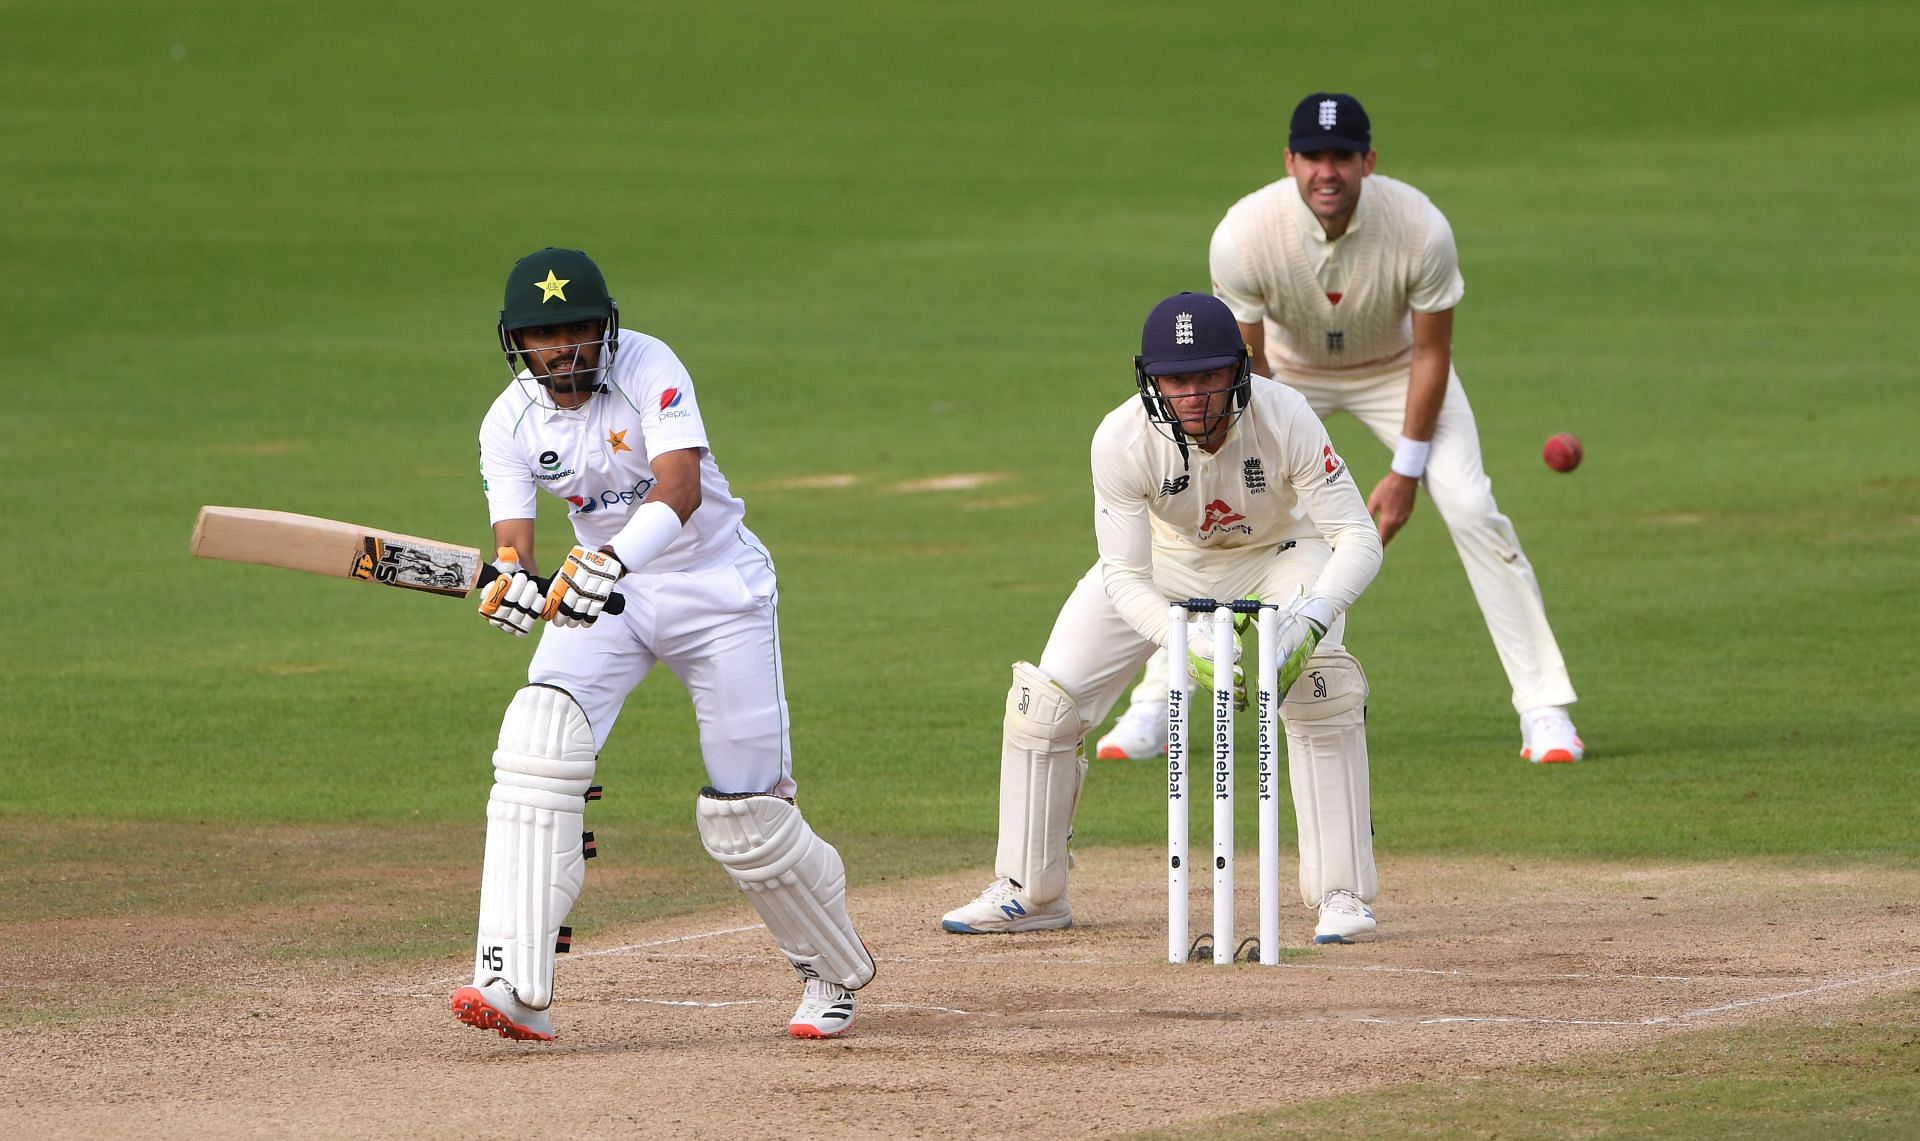 Pakistan are scheduled to play a home series against England later this year (Image: Getty)